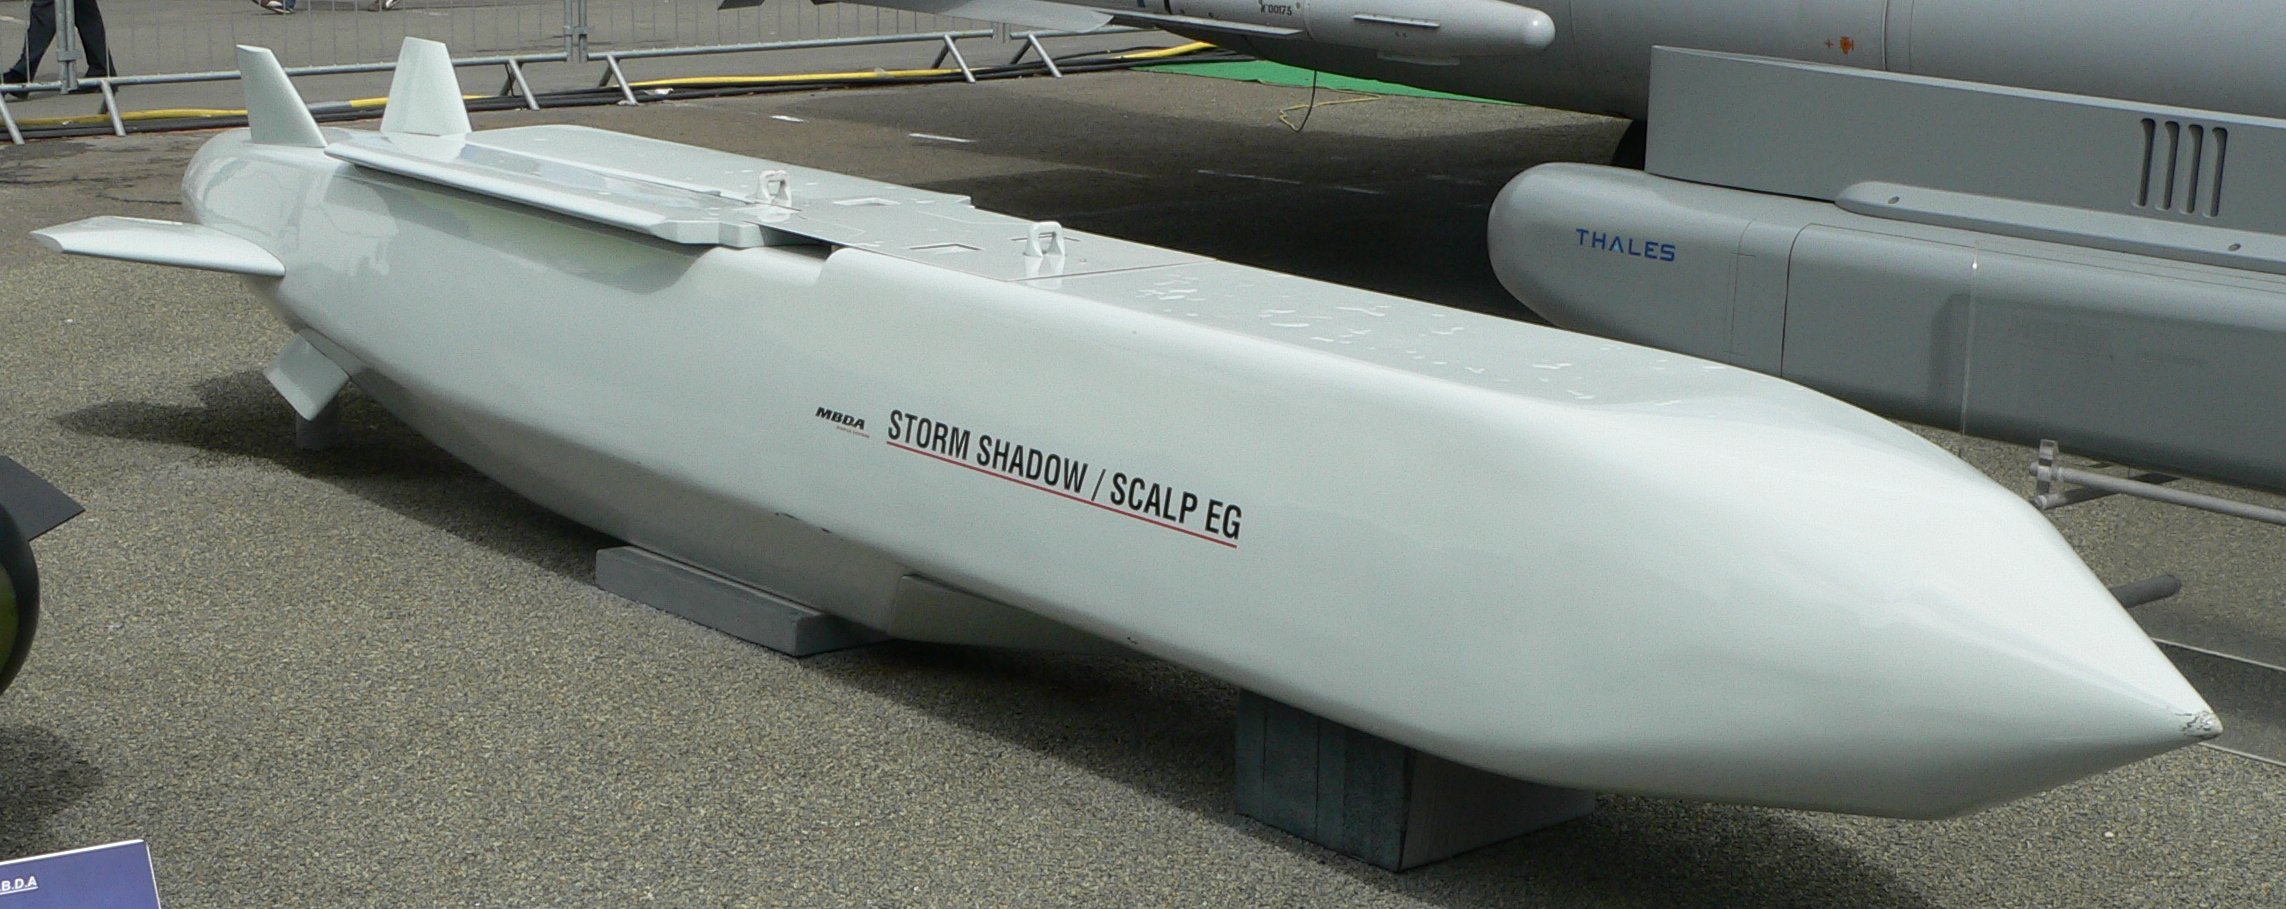 Great Britain can supply Ukraine with Storm Shadow cruise missiles (SCALP), which are launched from a plane and can hit targets at a distance of about 600 km